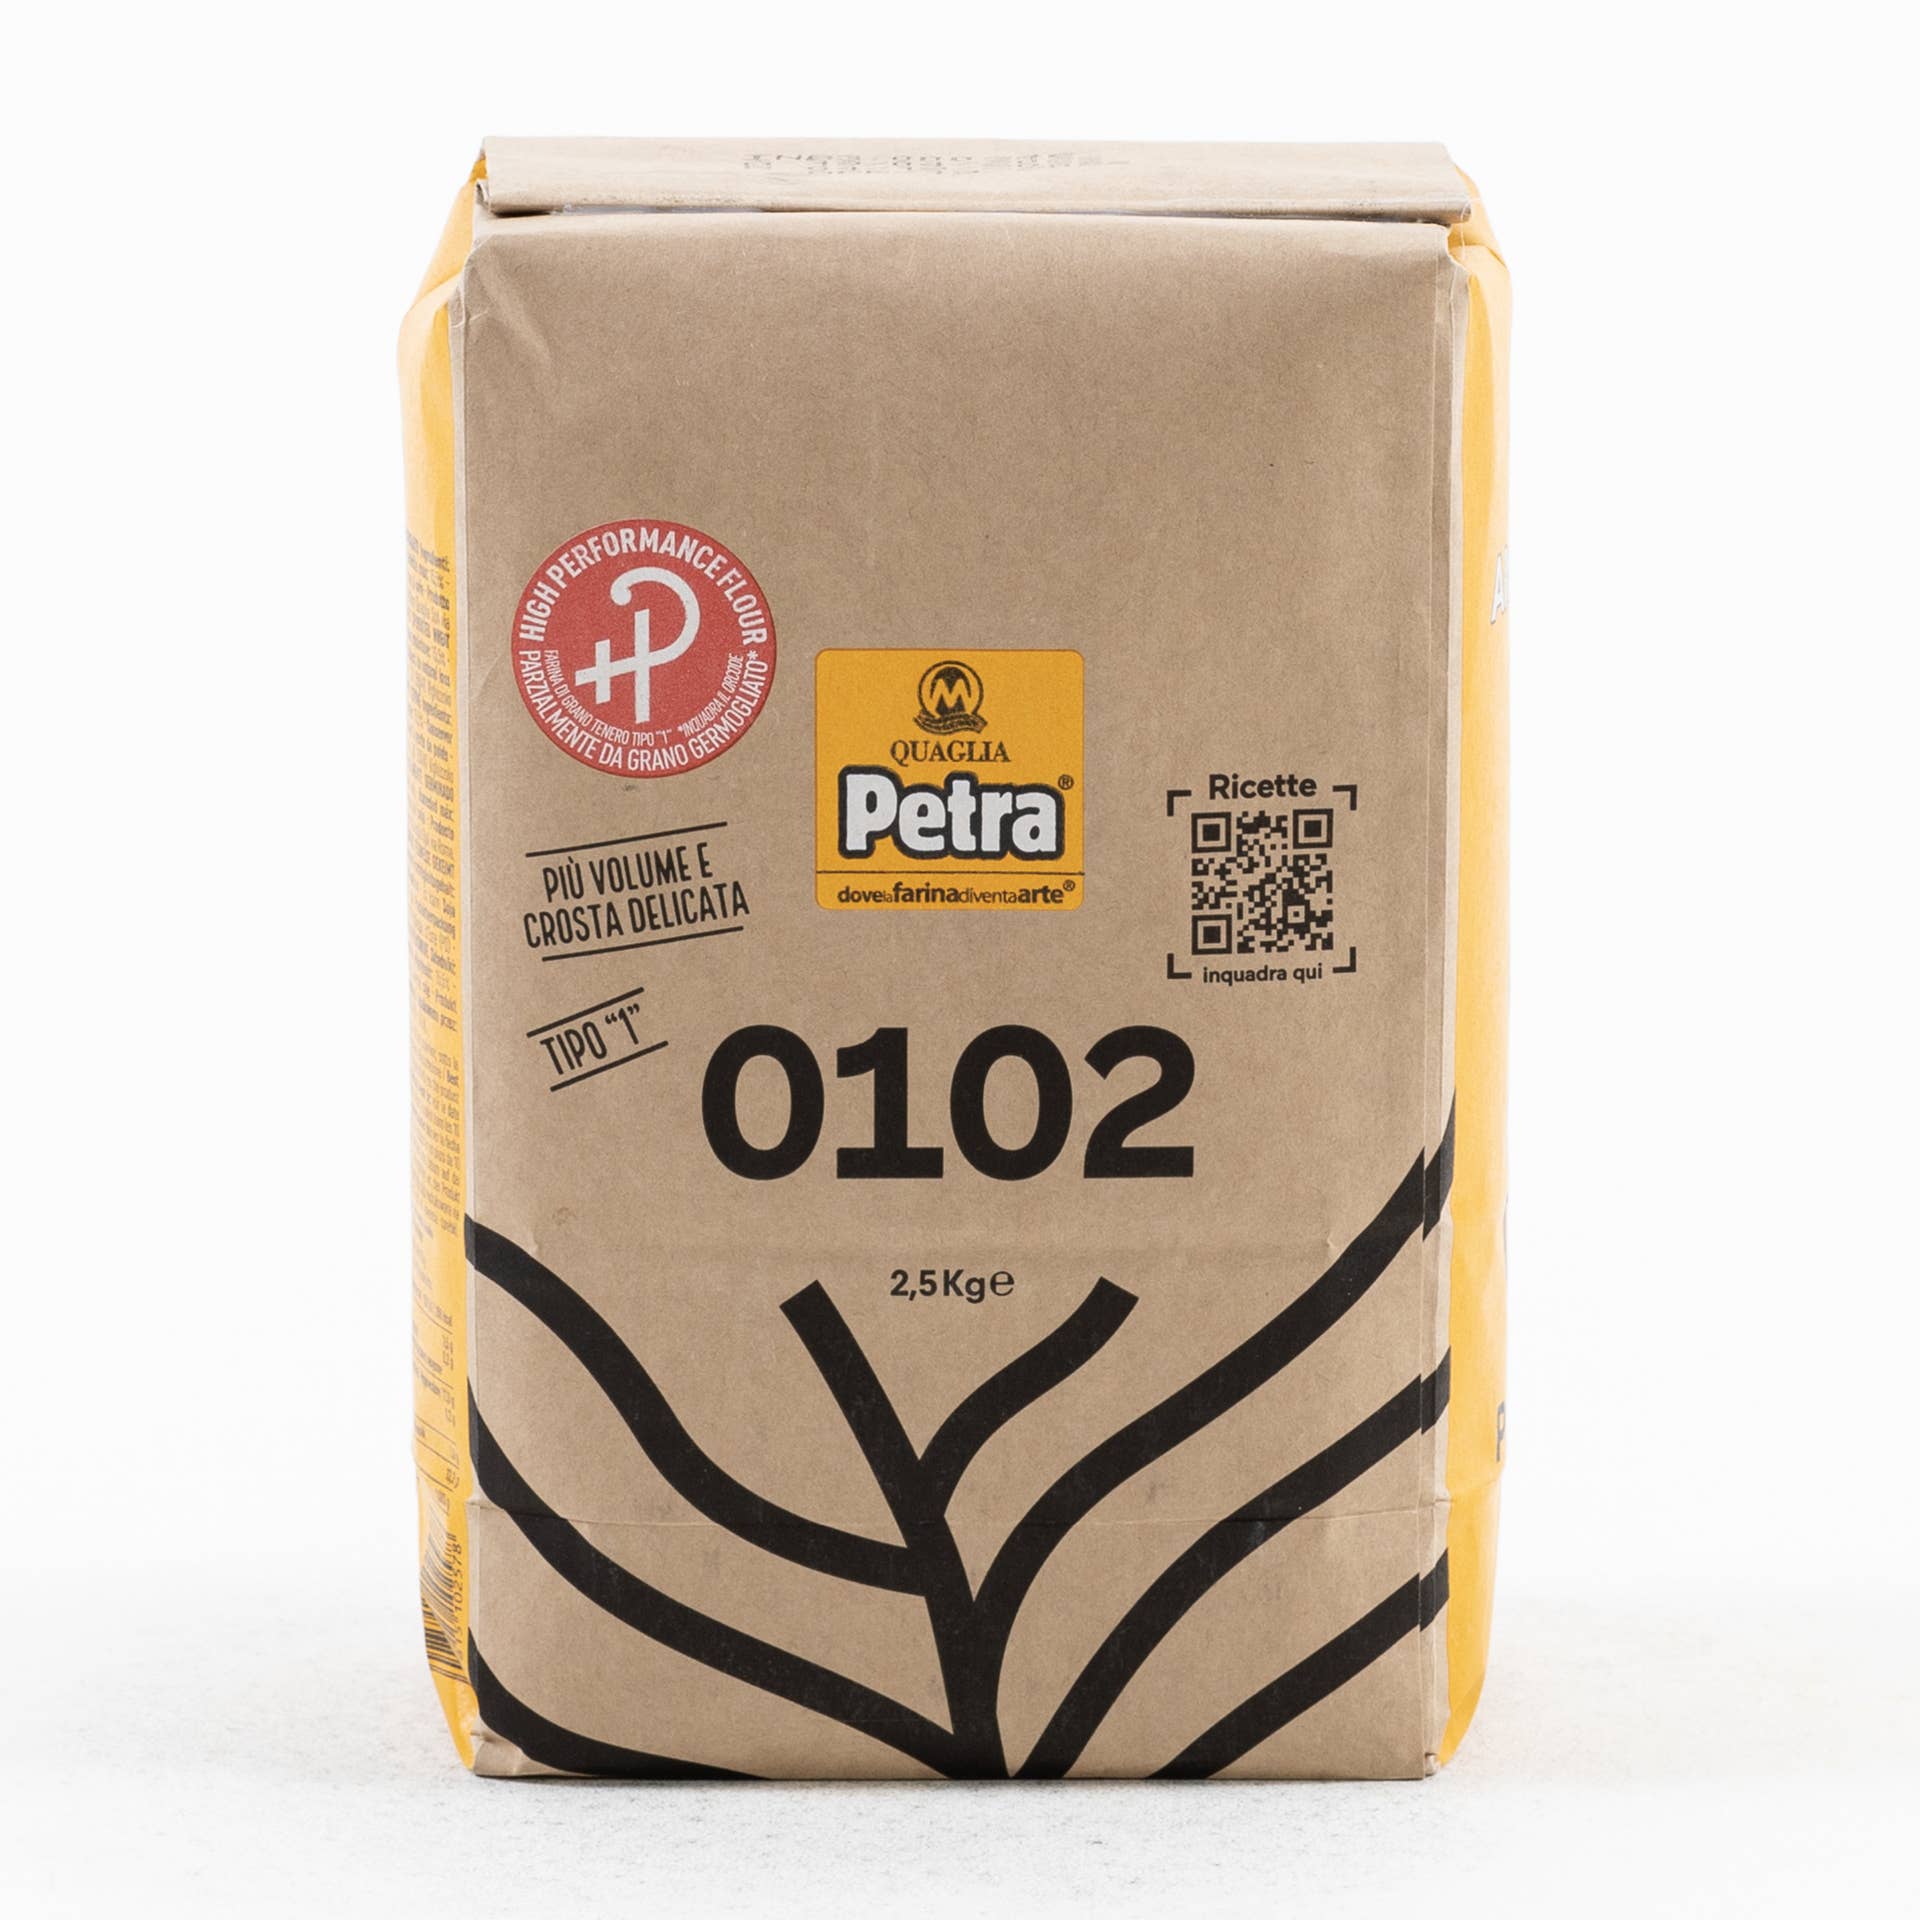 Wholesale PETRA 0102 HP - Type “1” flour from wheat germ 2.5 kg for your  store - Faire